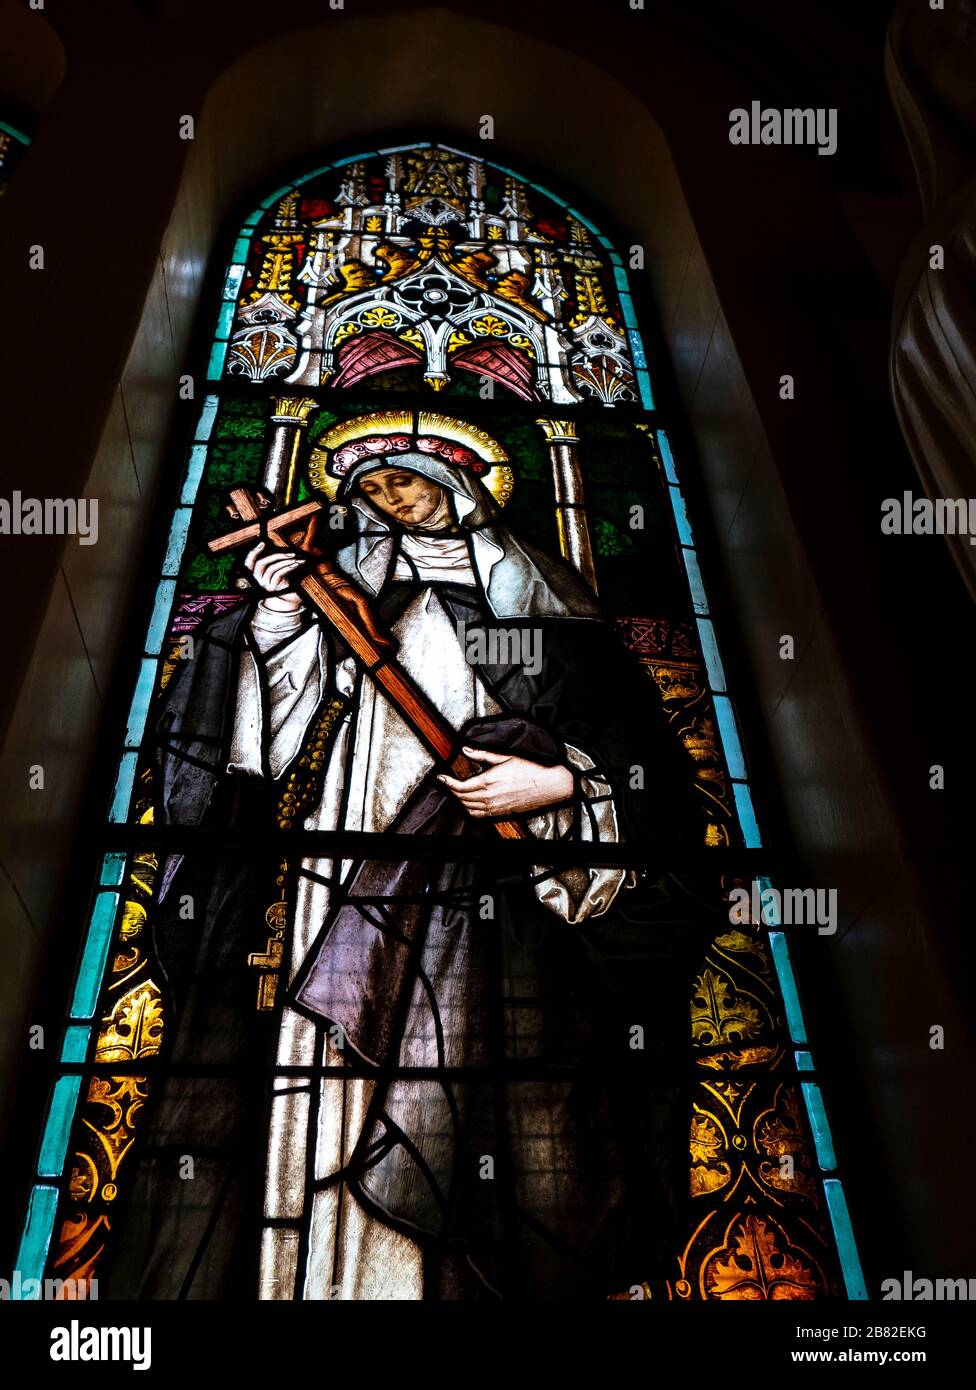 Stained Glass Window, St. Emmanuel Cathedral, Durban, South Africa Stock Photo